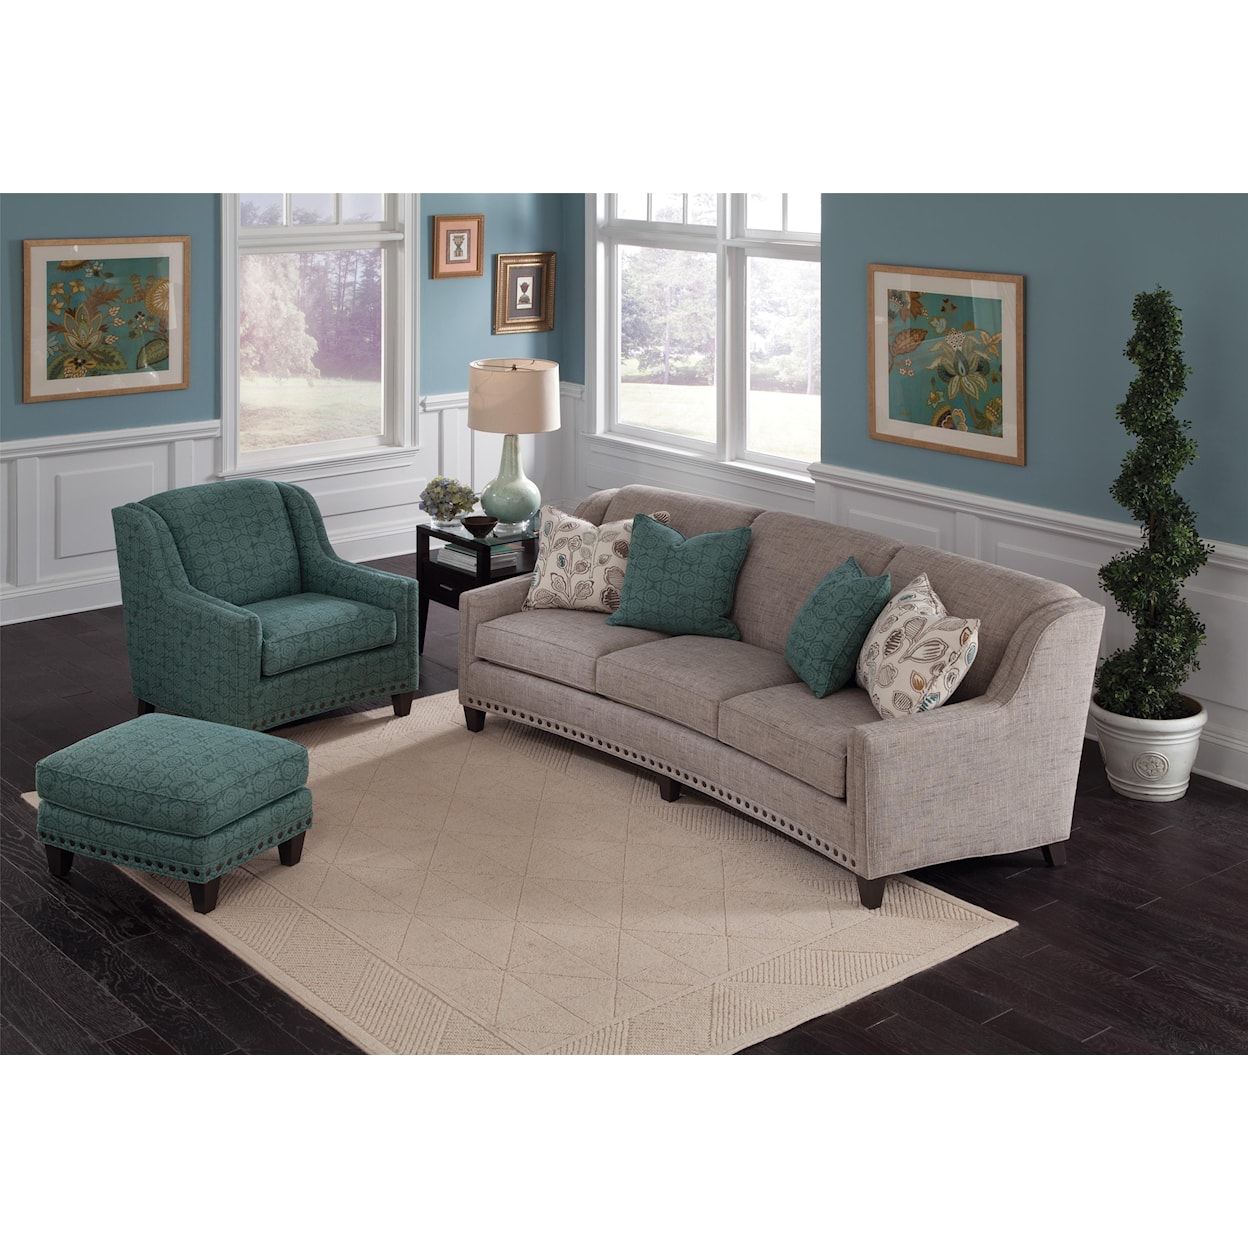 Smith Brothers 227 Stationary Living Room Group